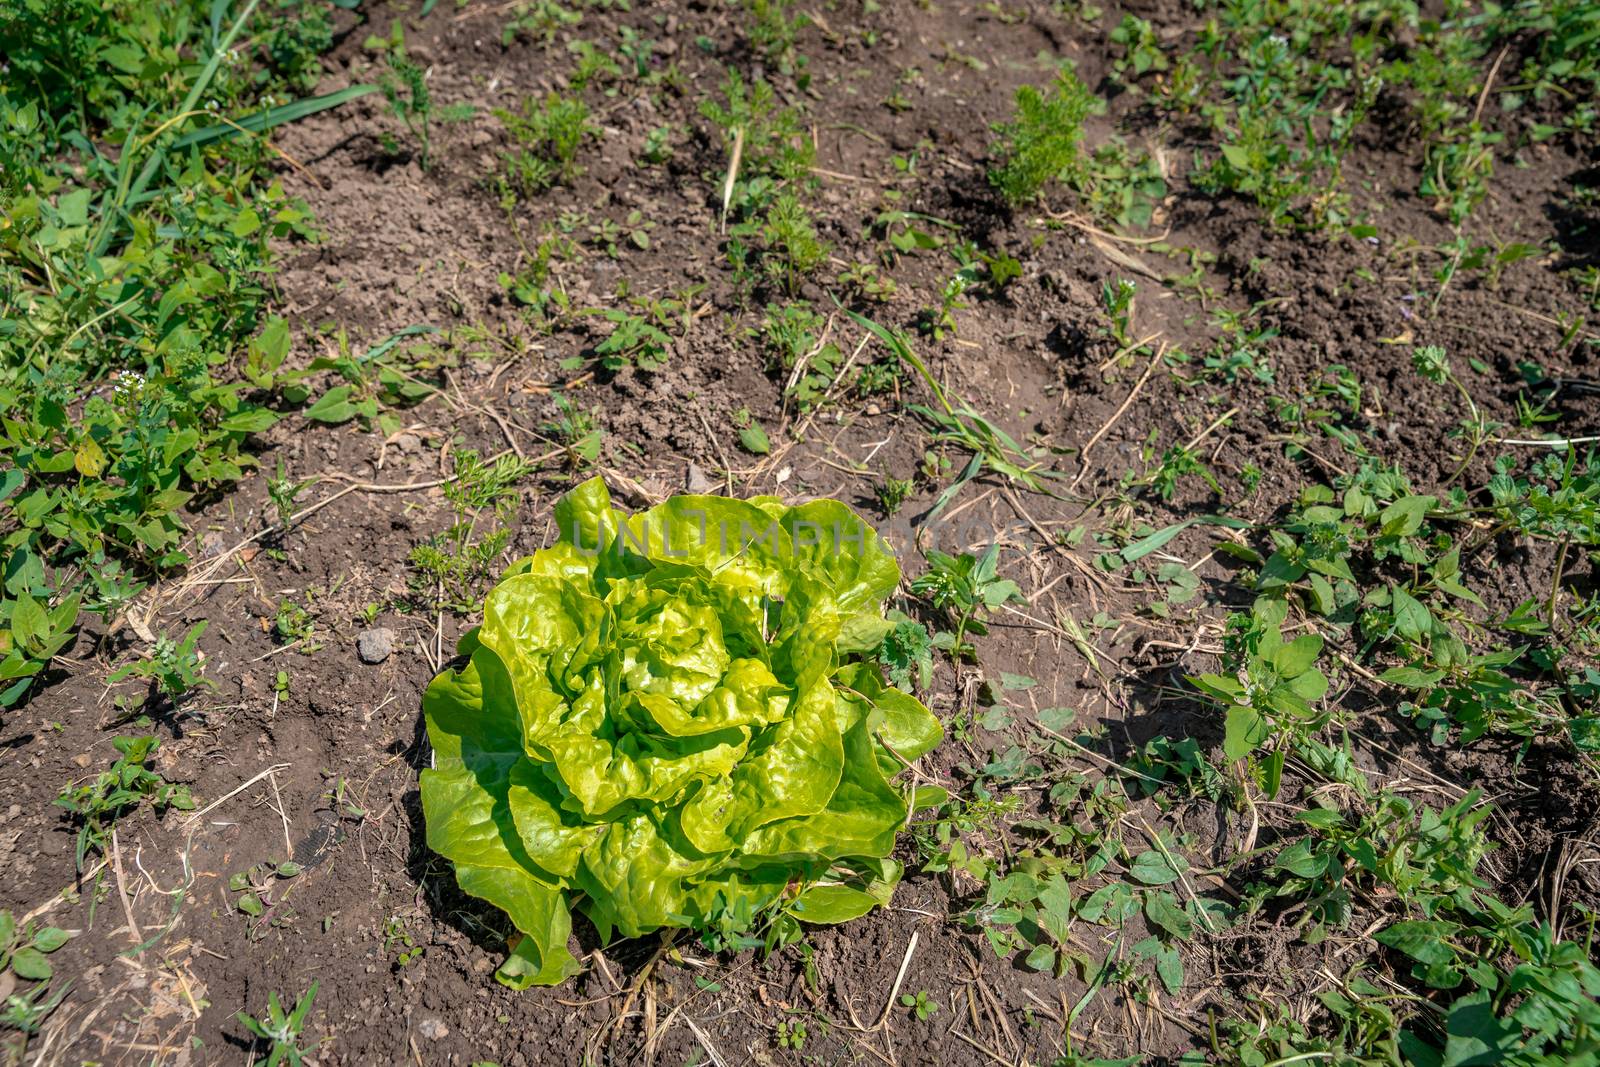 head salads in a field on an organic farm grown without pesticides and chemicals.